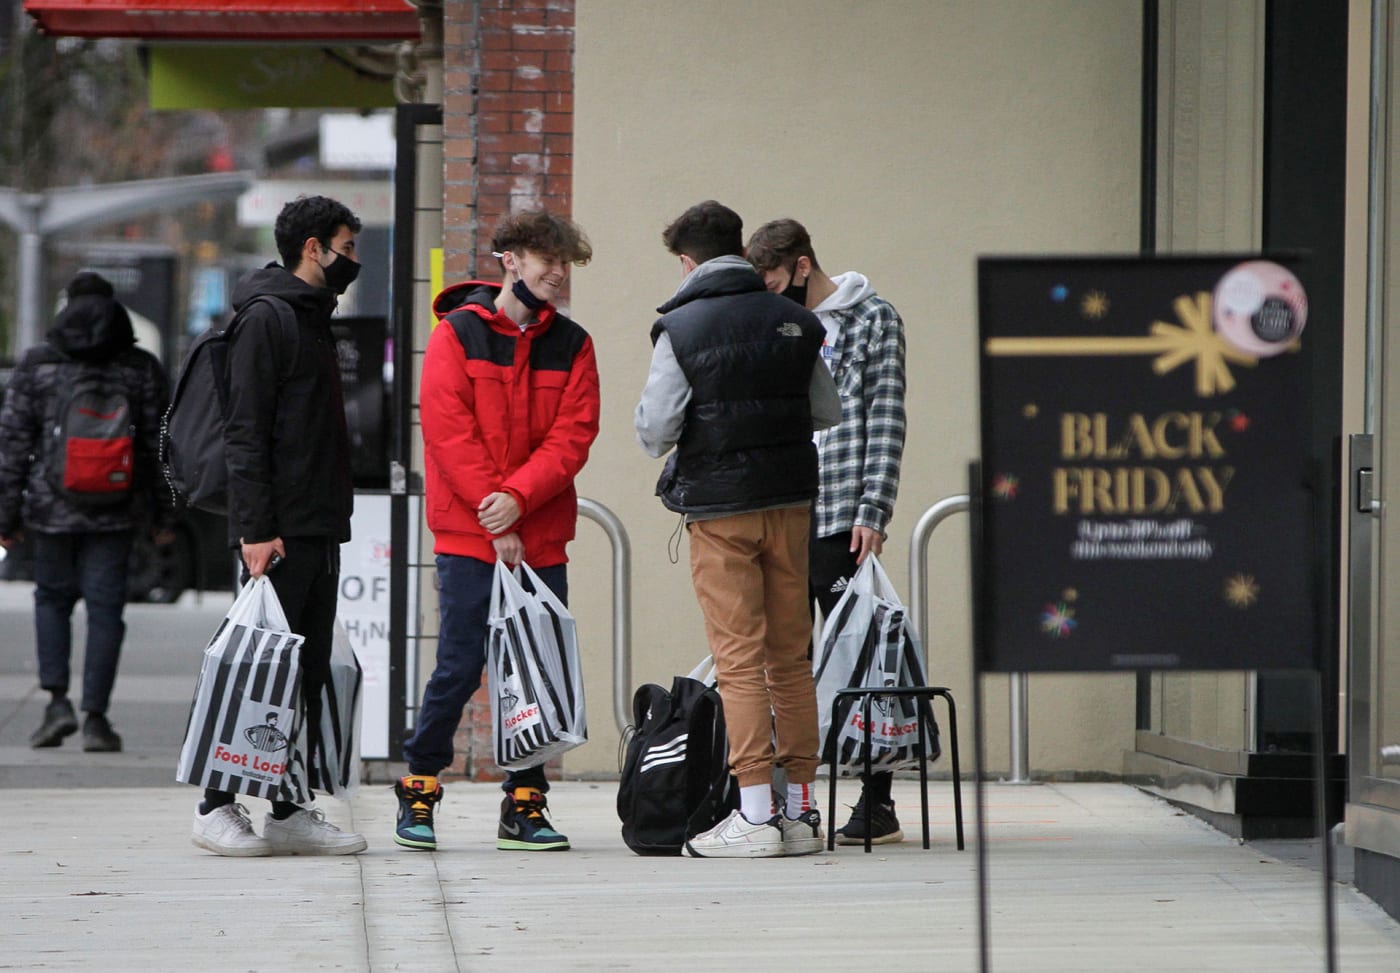 People carry their purchases during Black Friday shopping in downtown Vancouver, British Columbia